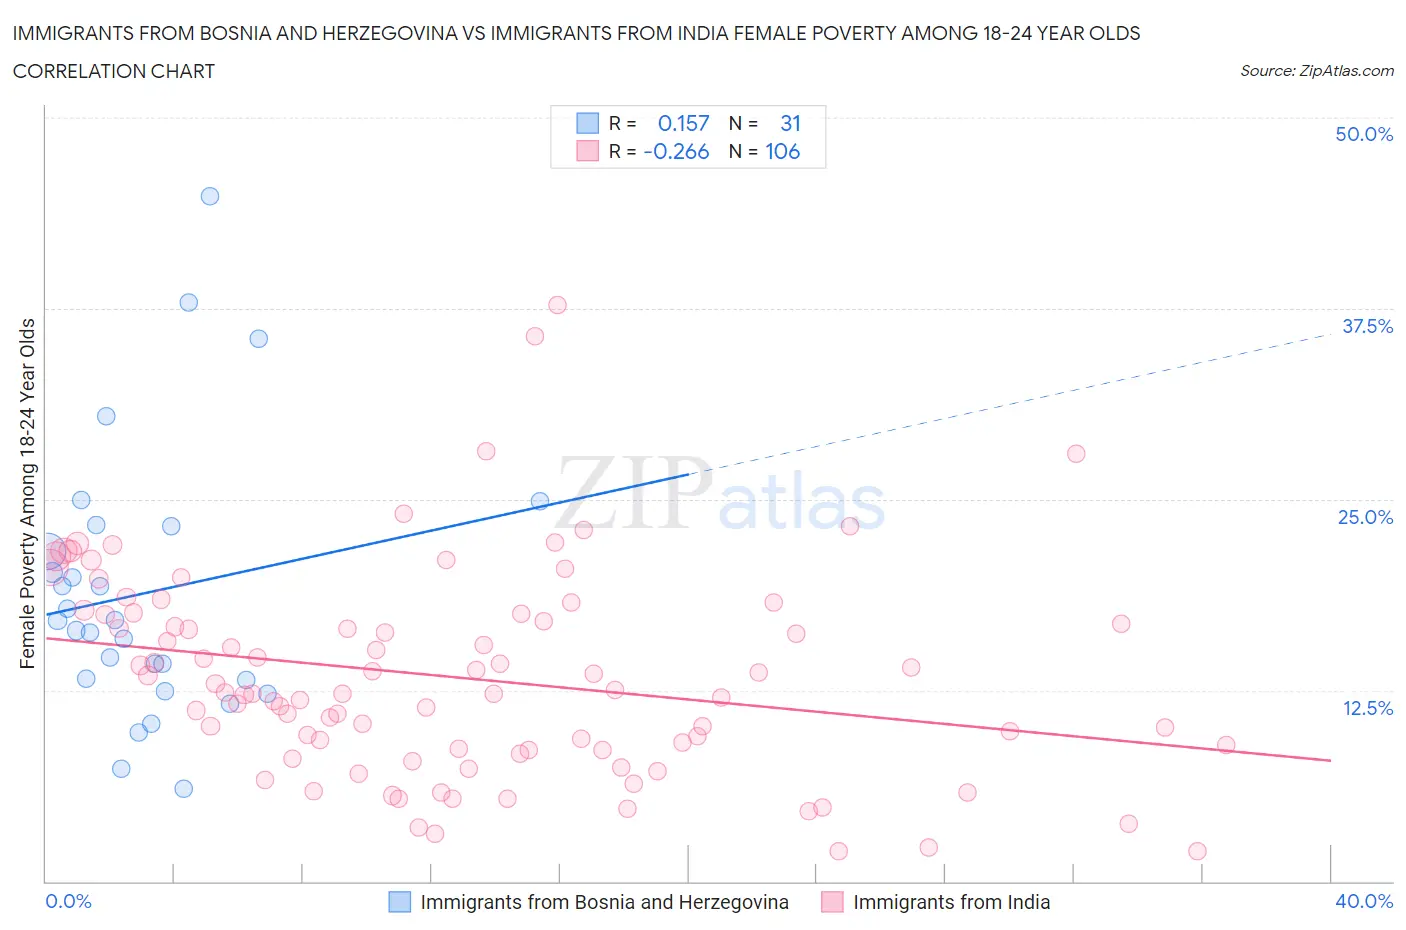 Immigrants from Bosnia and Herzegovina vs Immigrants from India Female Poverty Among 18-24 Year Olds